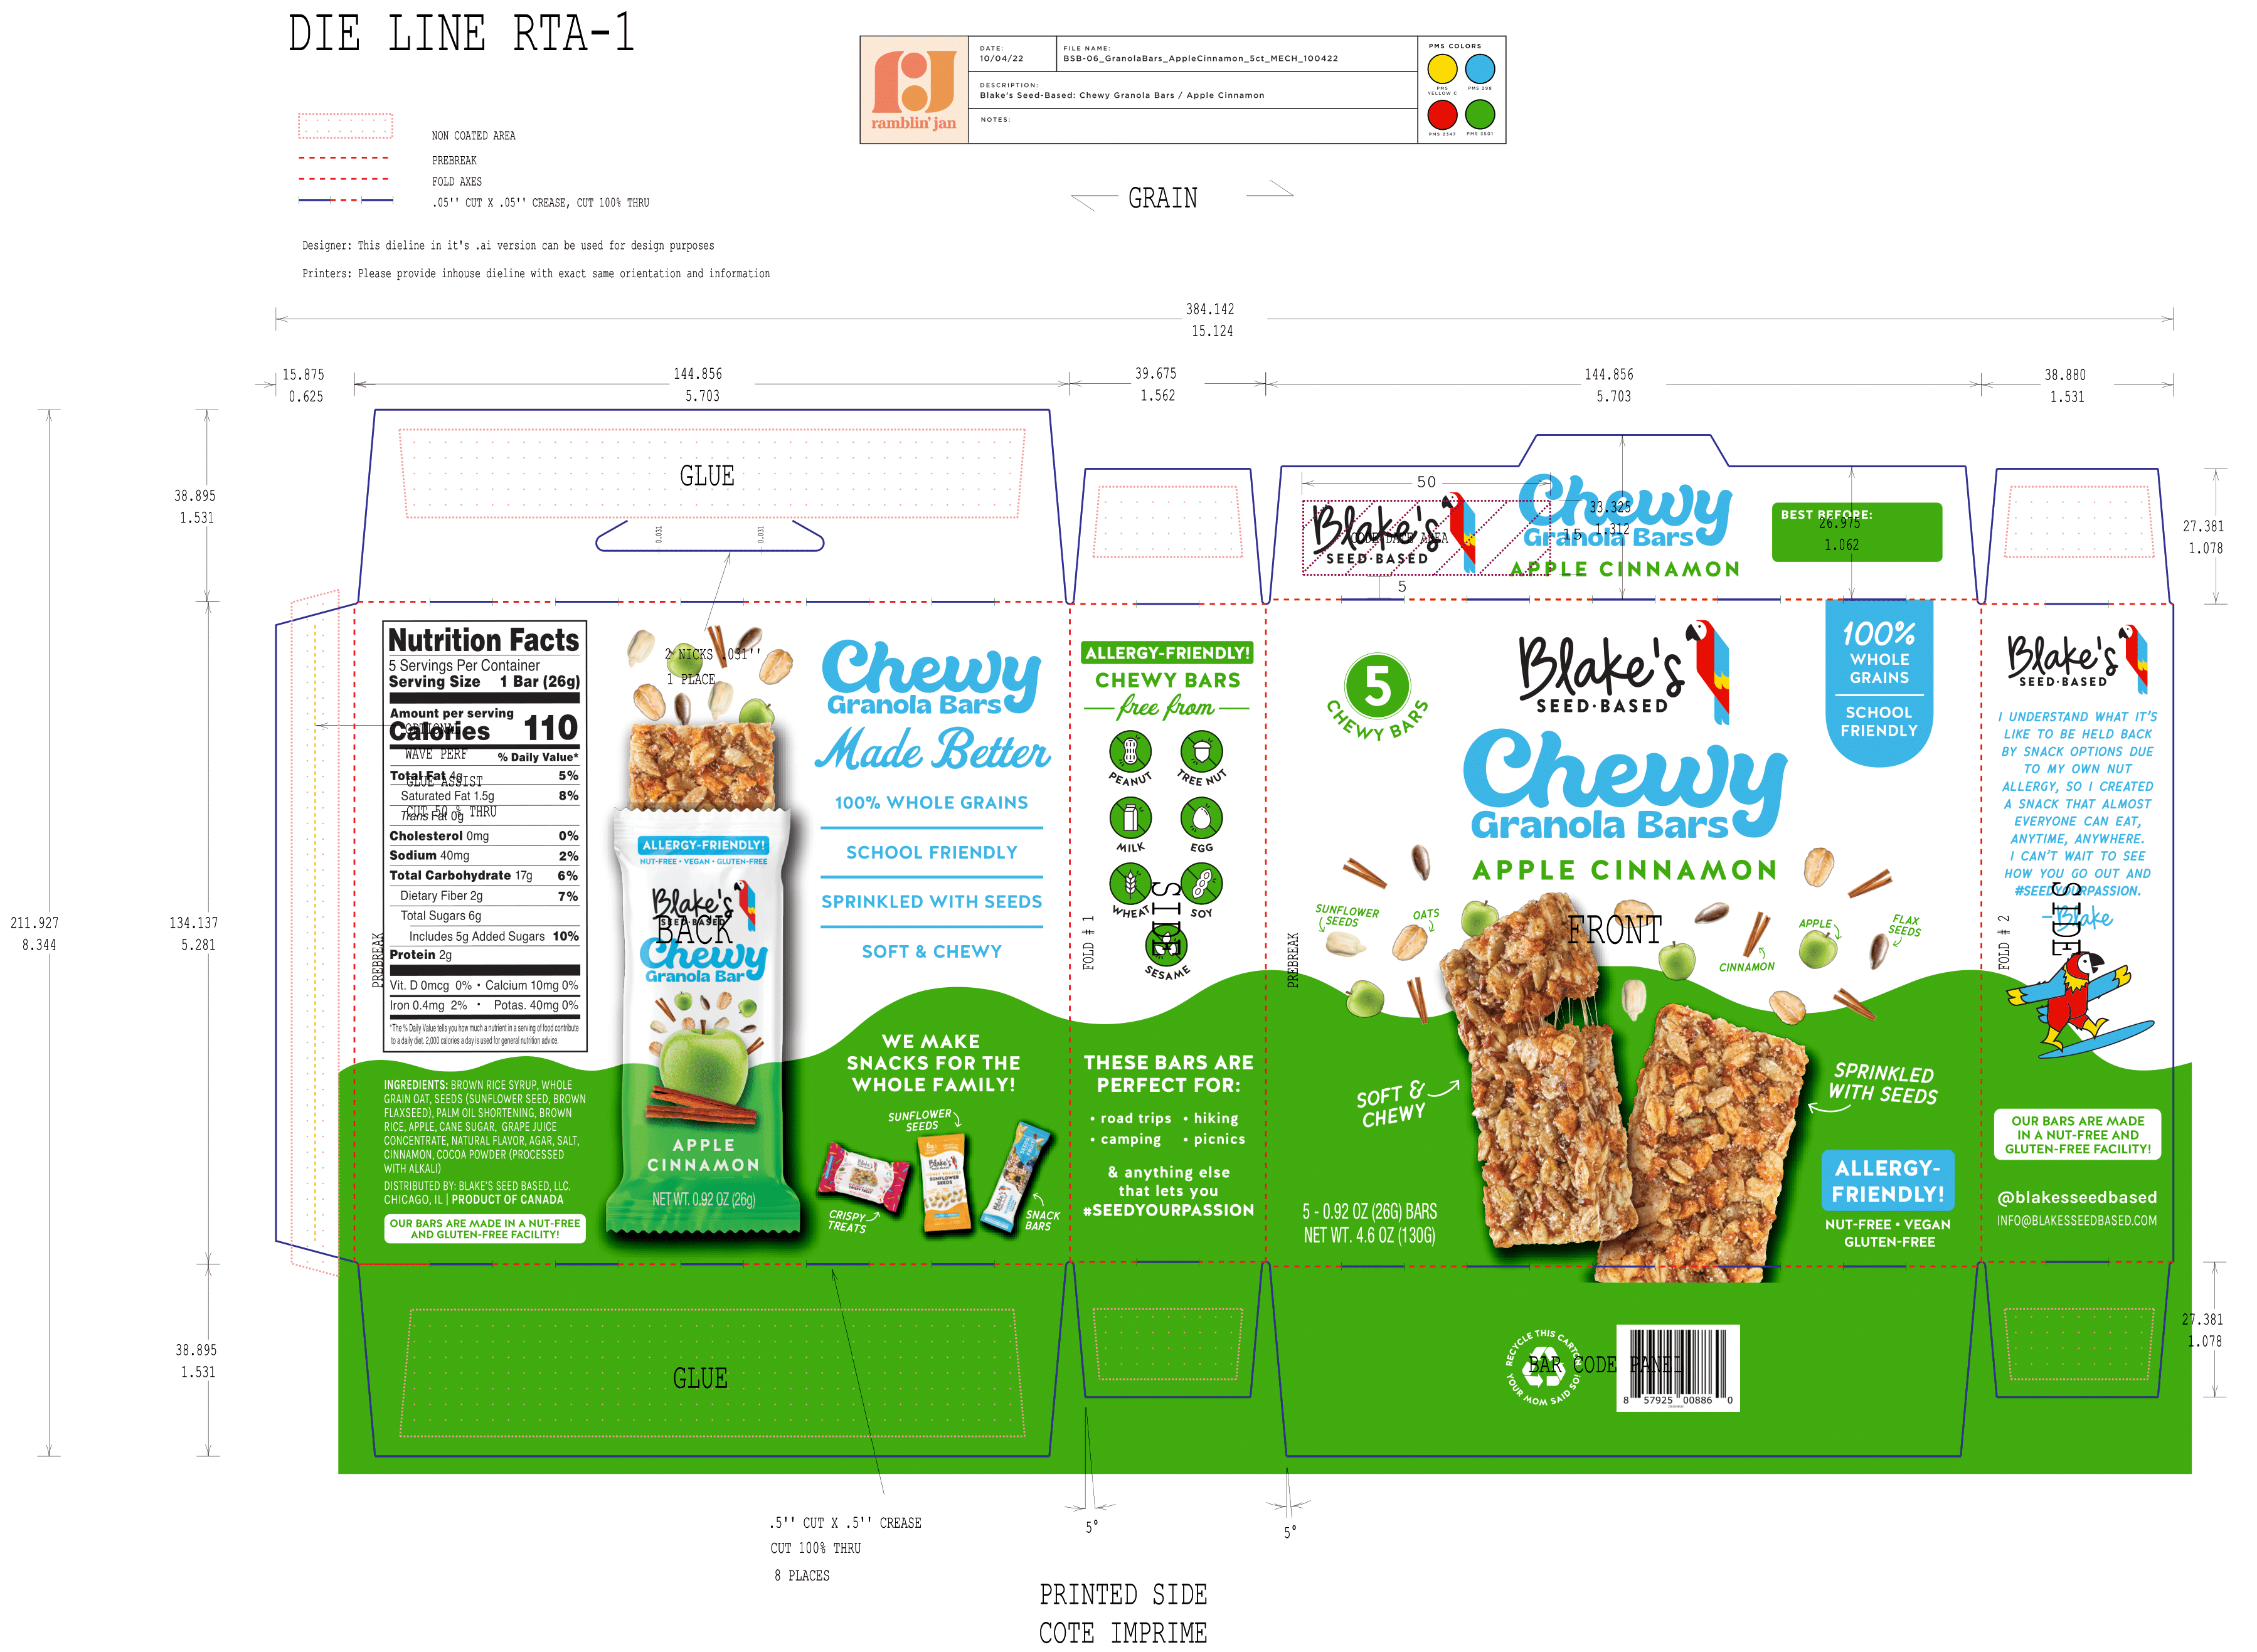 Blake's Seed Based Apple Cinnamon Chewy Granola Bar 12 innerpacks per case 4.6 oz Product Label